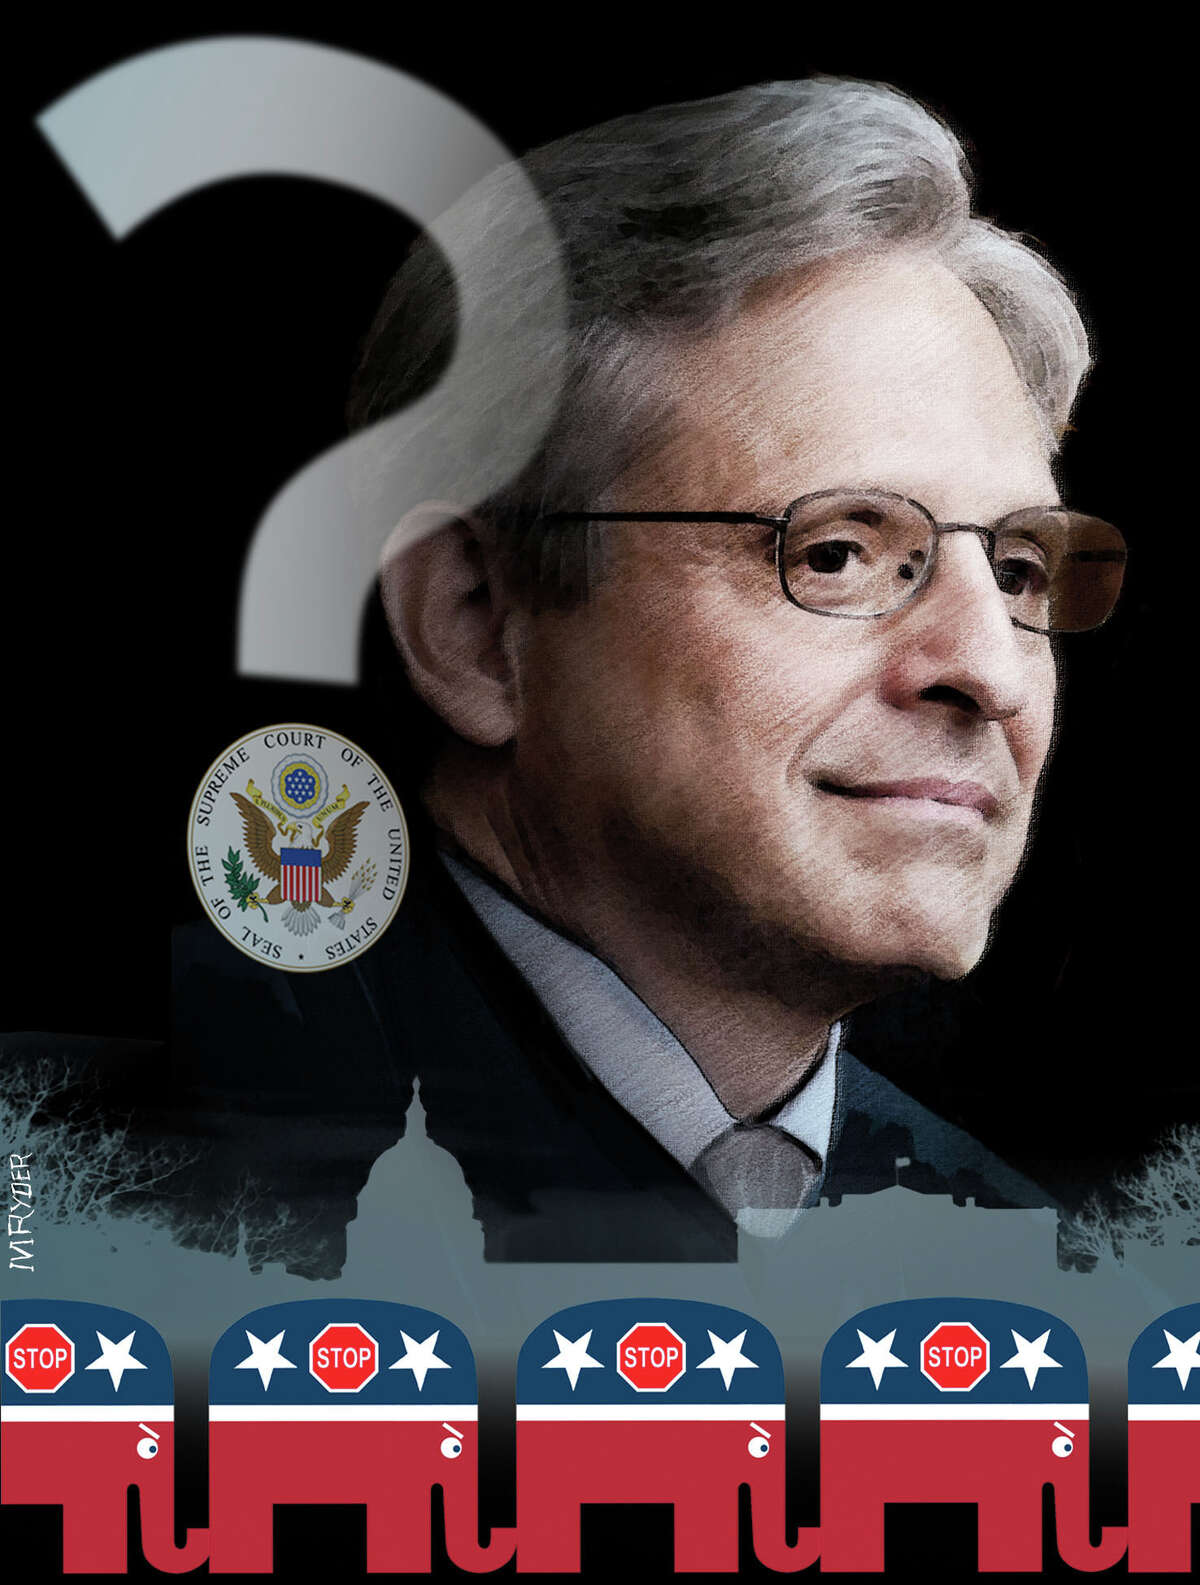 This artwork by M. Ryder refers to Merrick Garland as nominee to the U.S. Supreme Court.